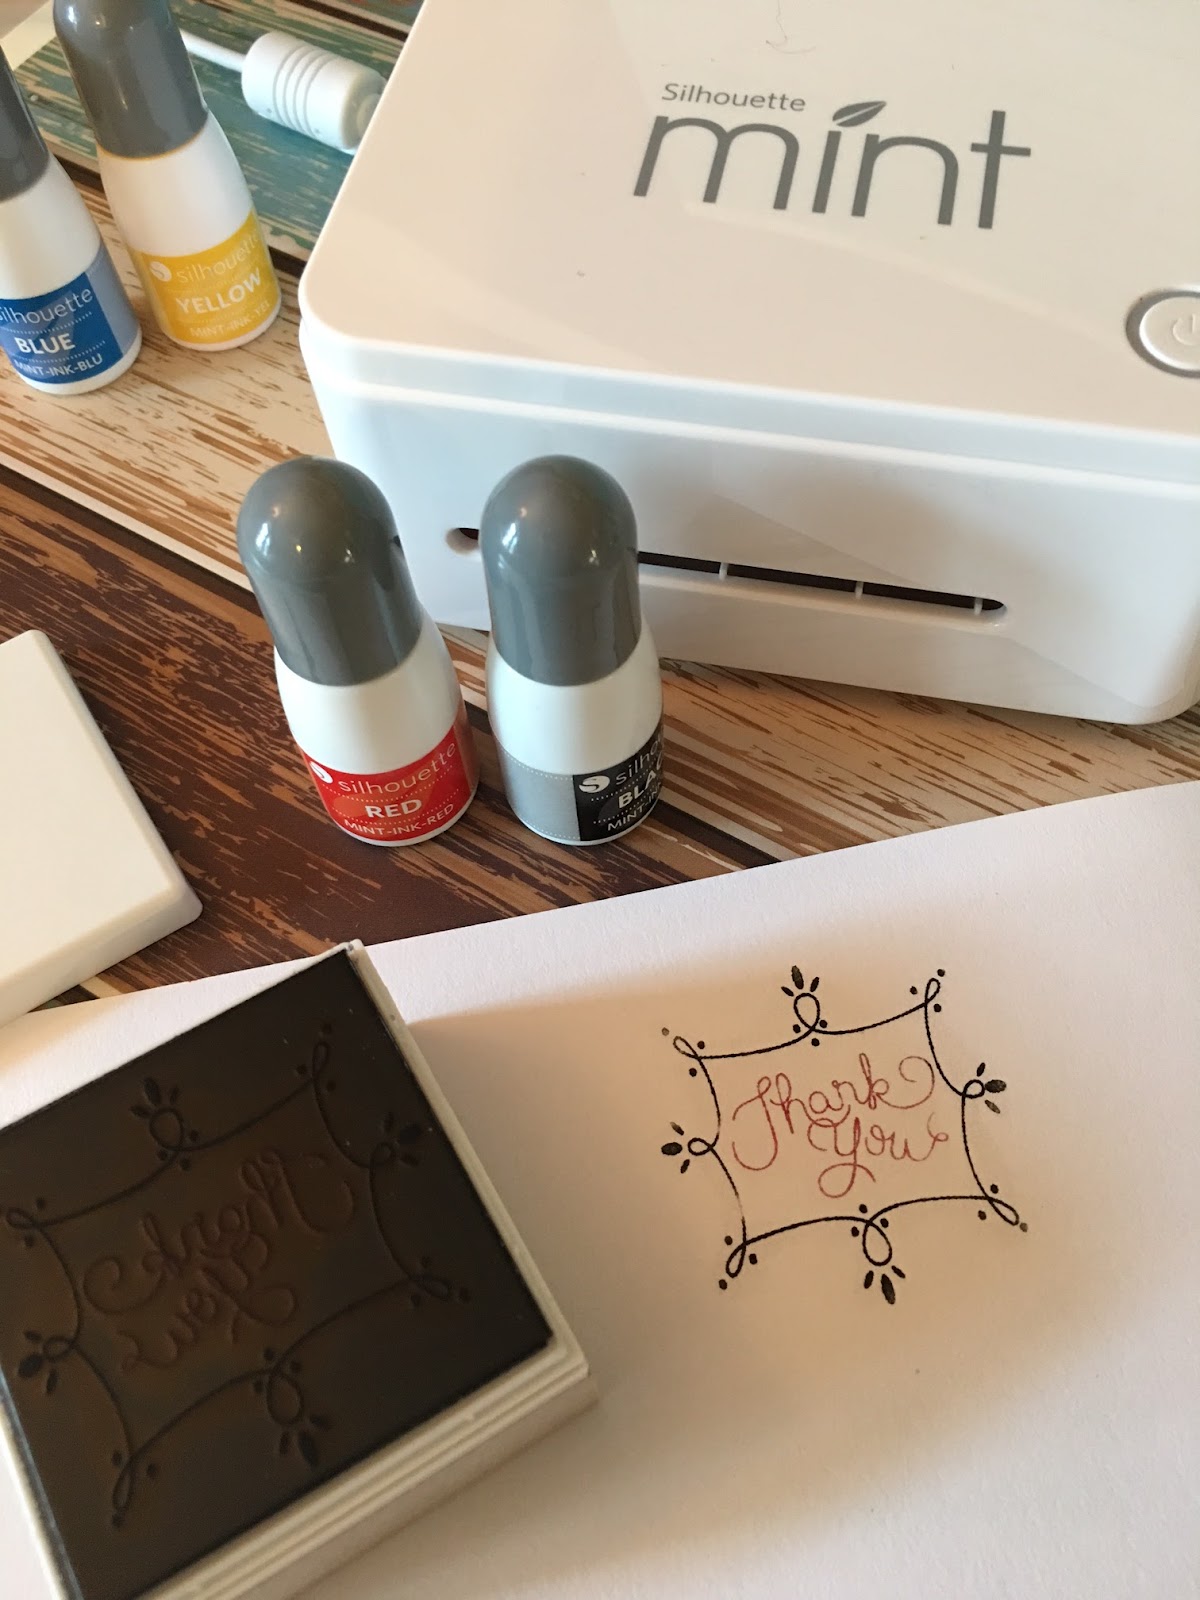 How to Use Silhouette Mint Stamps with a Stamp Platform (Alternate Method -  Video)